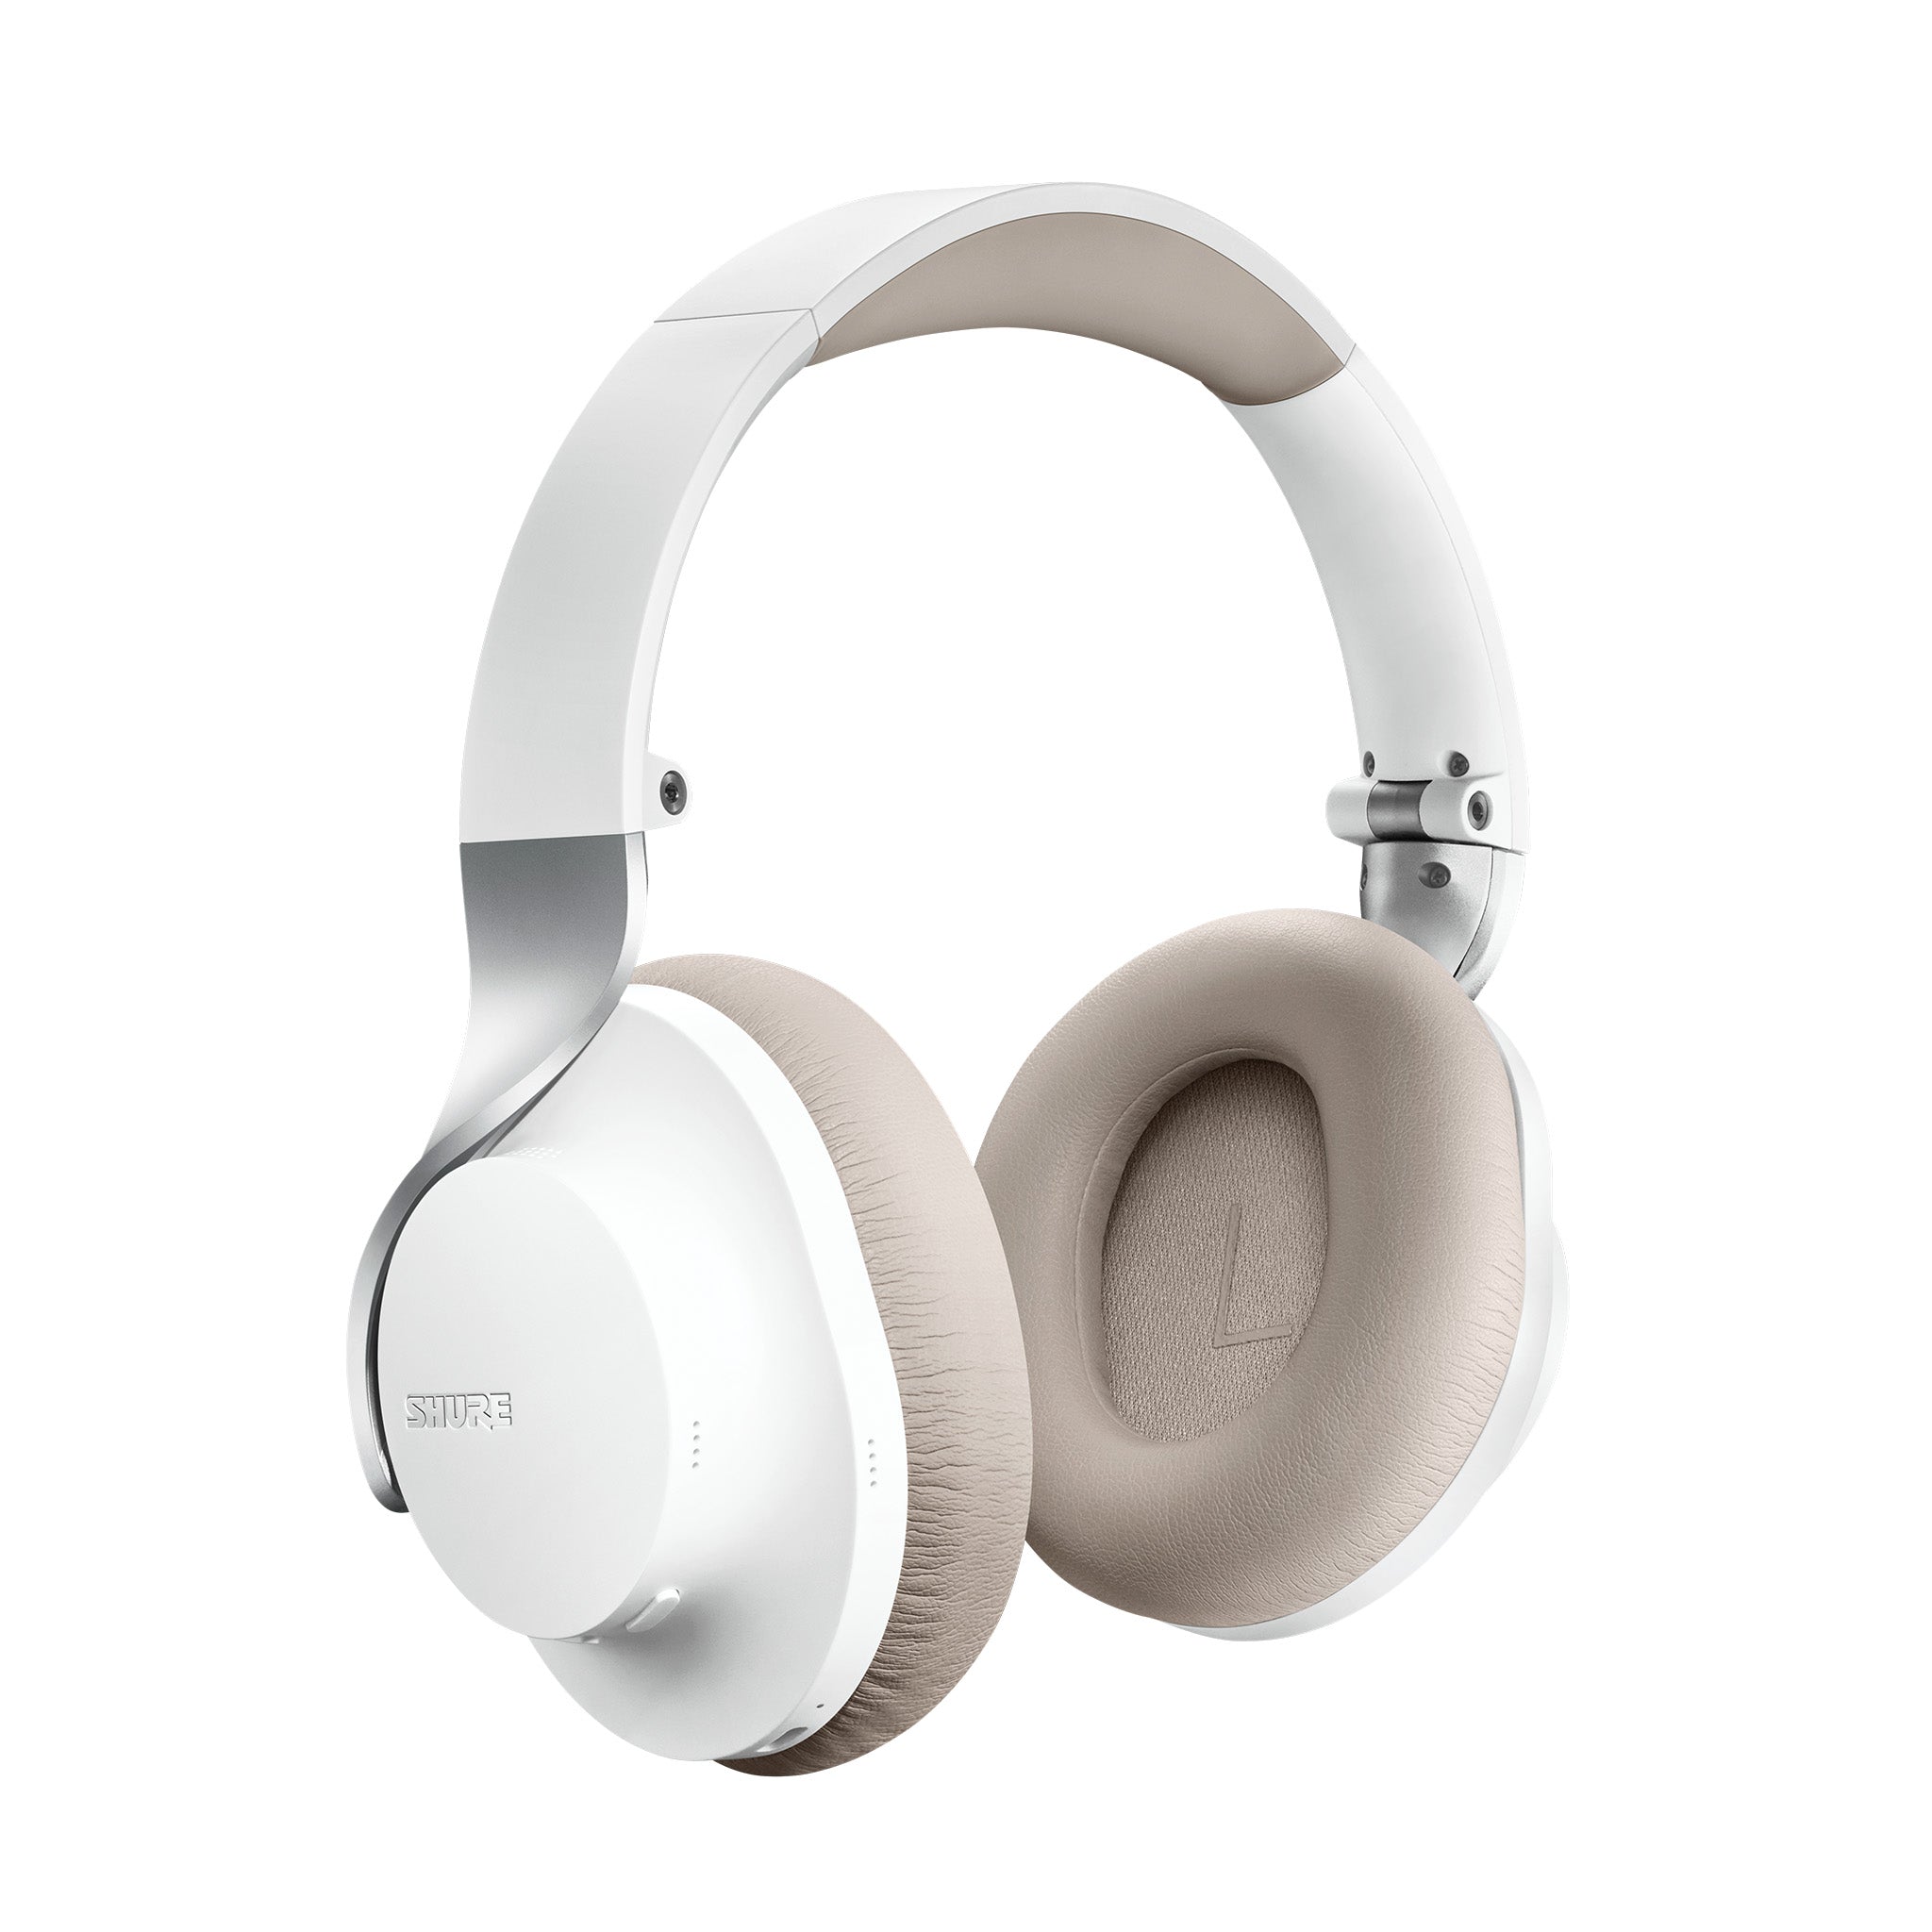 AONIC 40 Wireless Noise Cancelling Headphones (White)